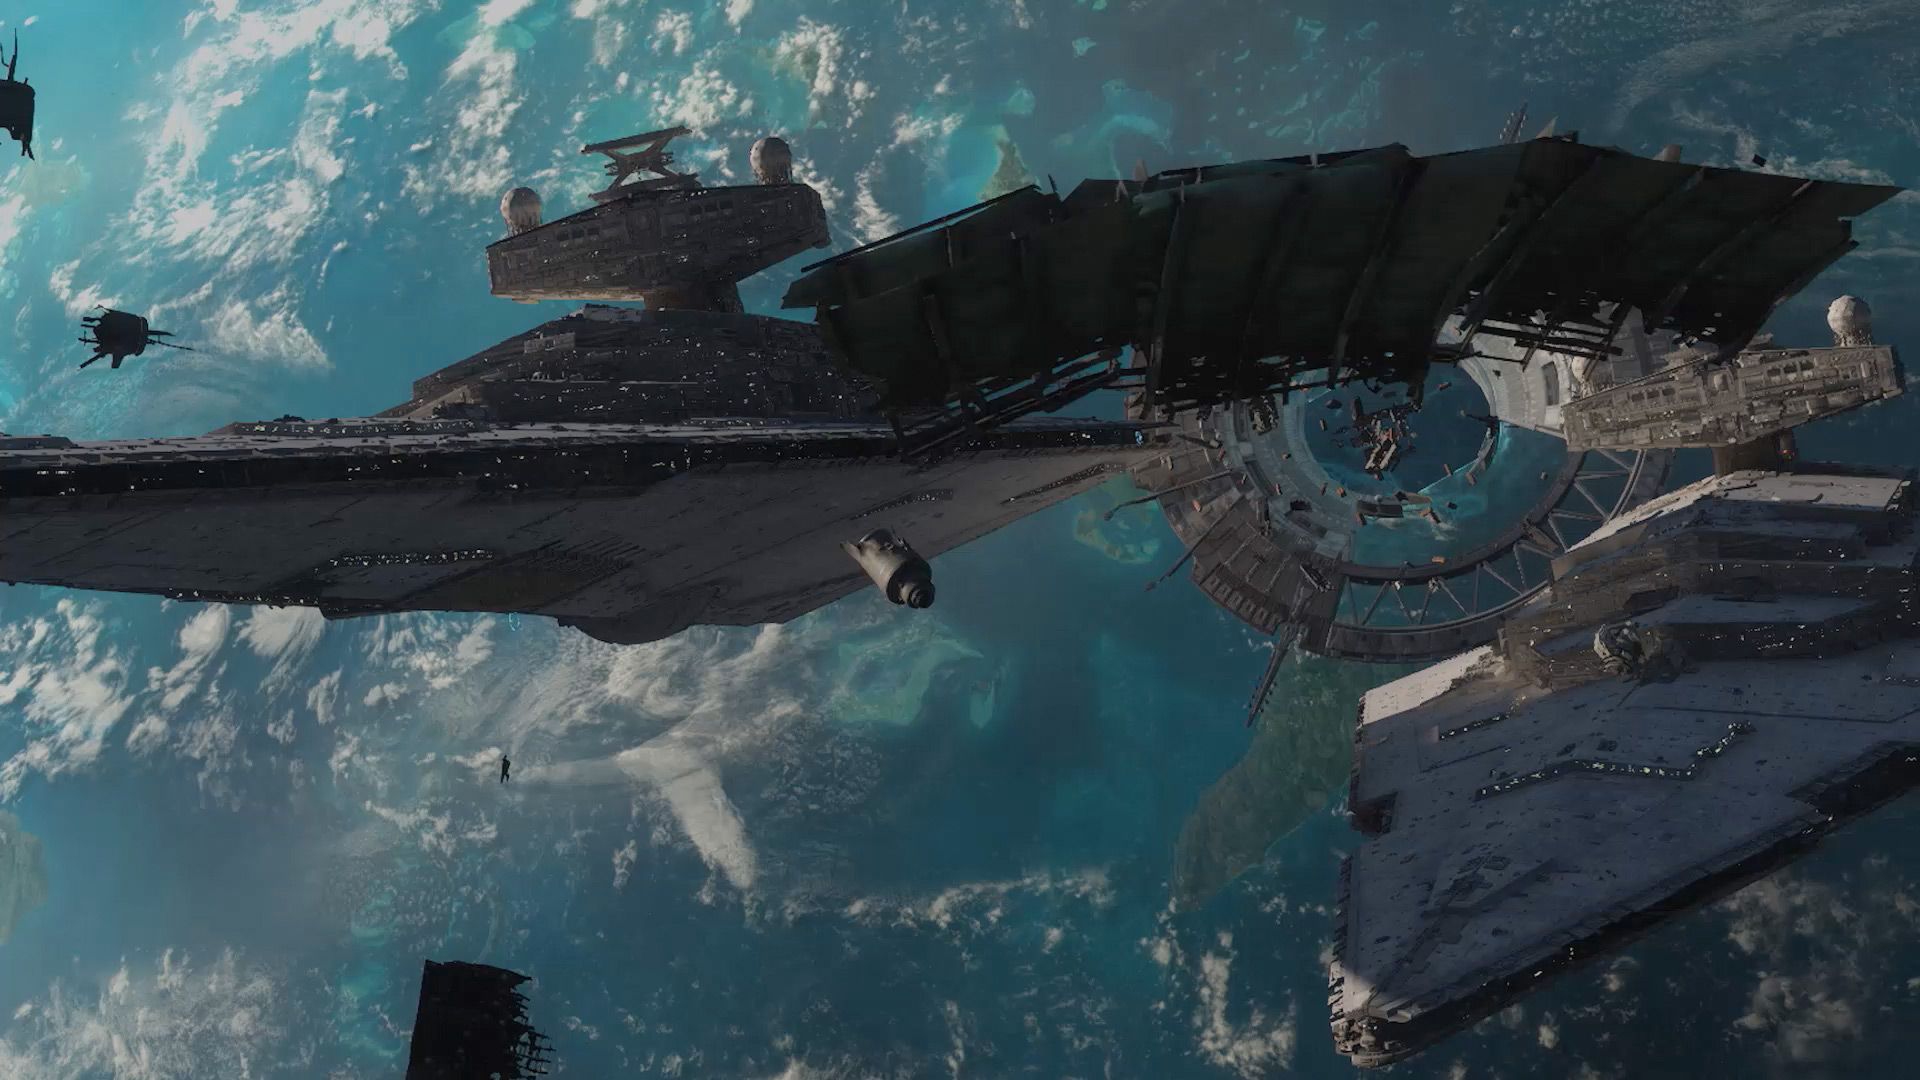 Star Wars Battlefront DLC Rogue One: Scarif patch notes reveal new Infiltration mode